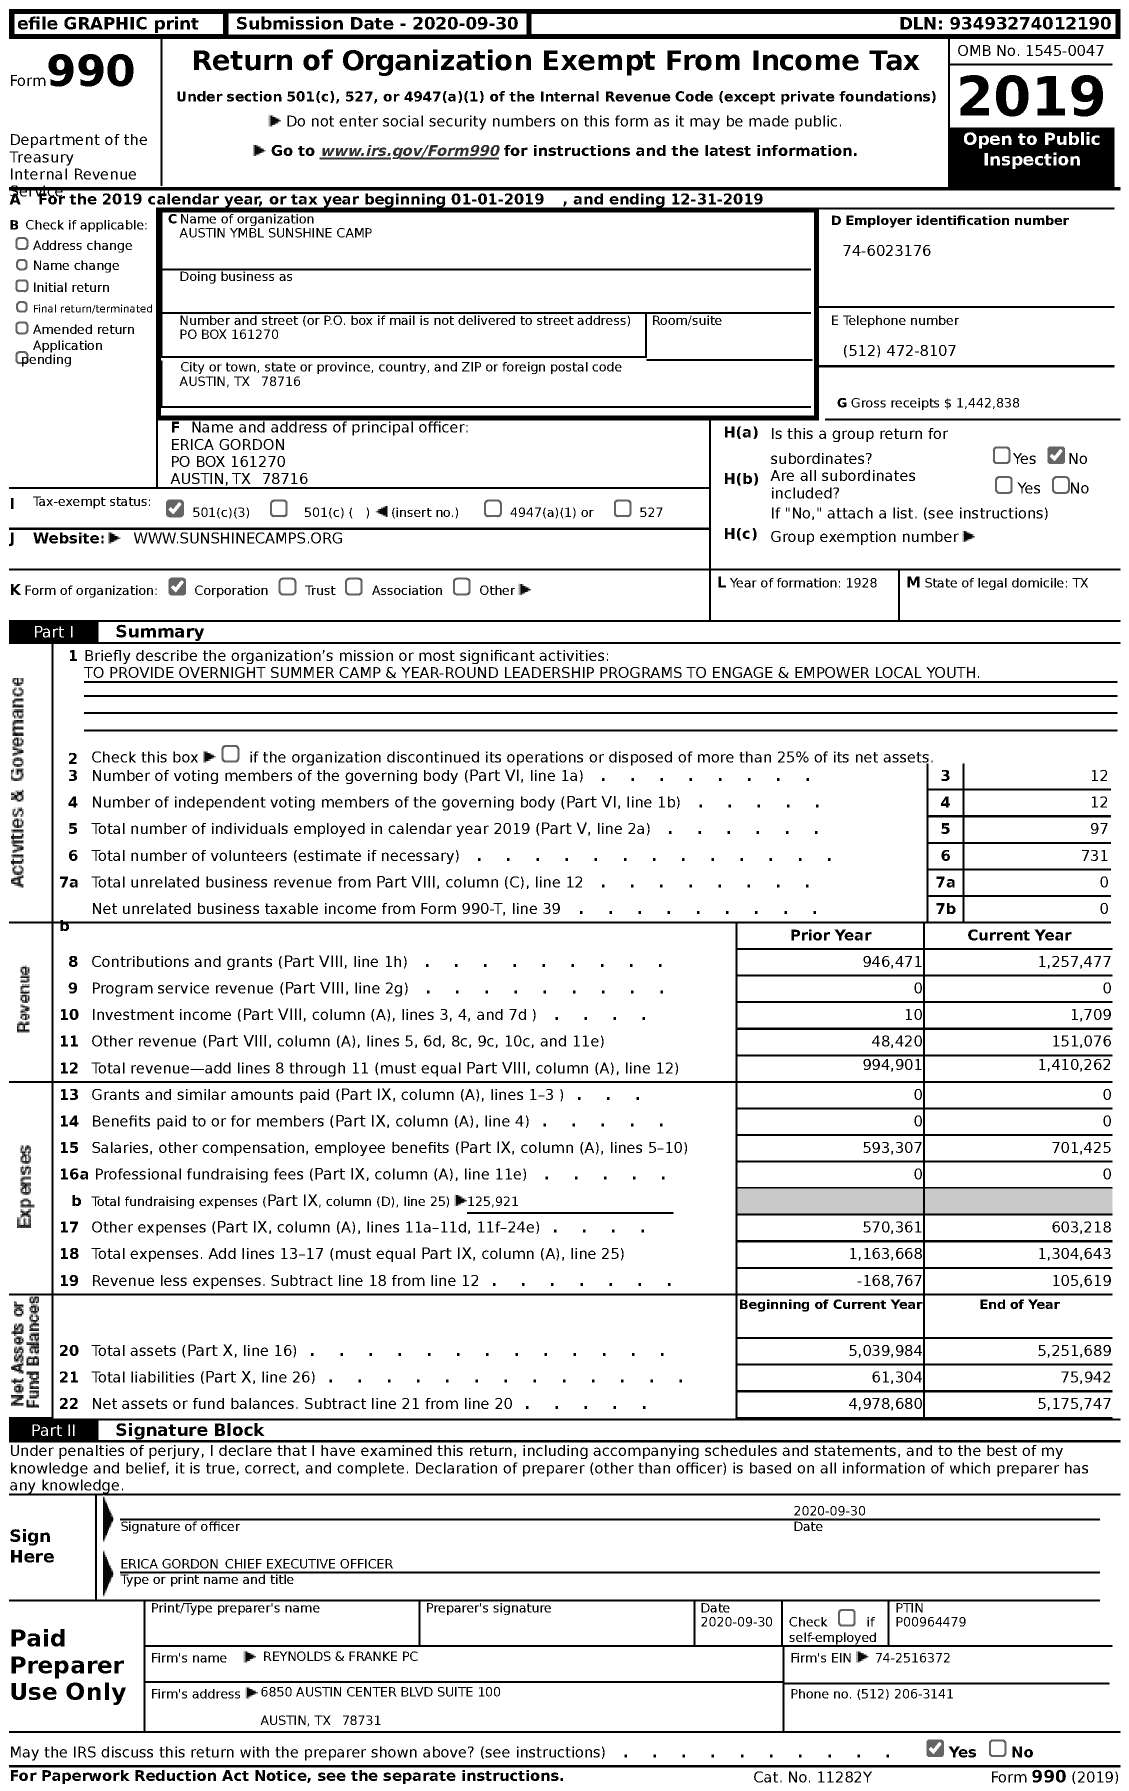 Image of first page of 2019 Form 990 for Austin Ymbl Sunshine Camp